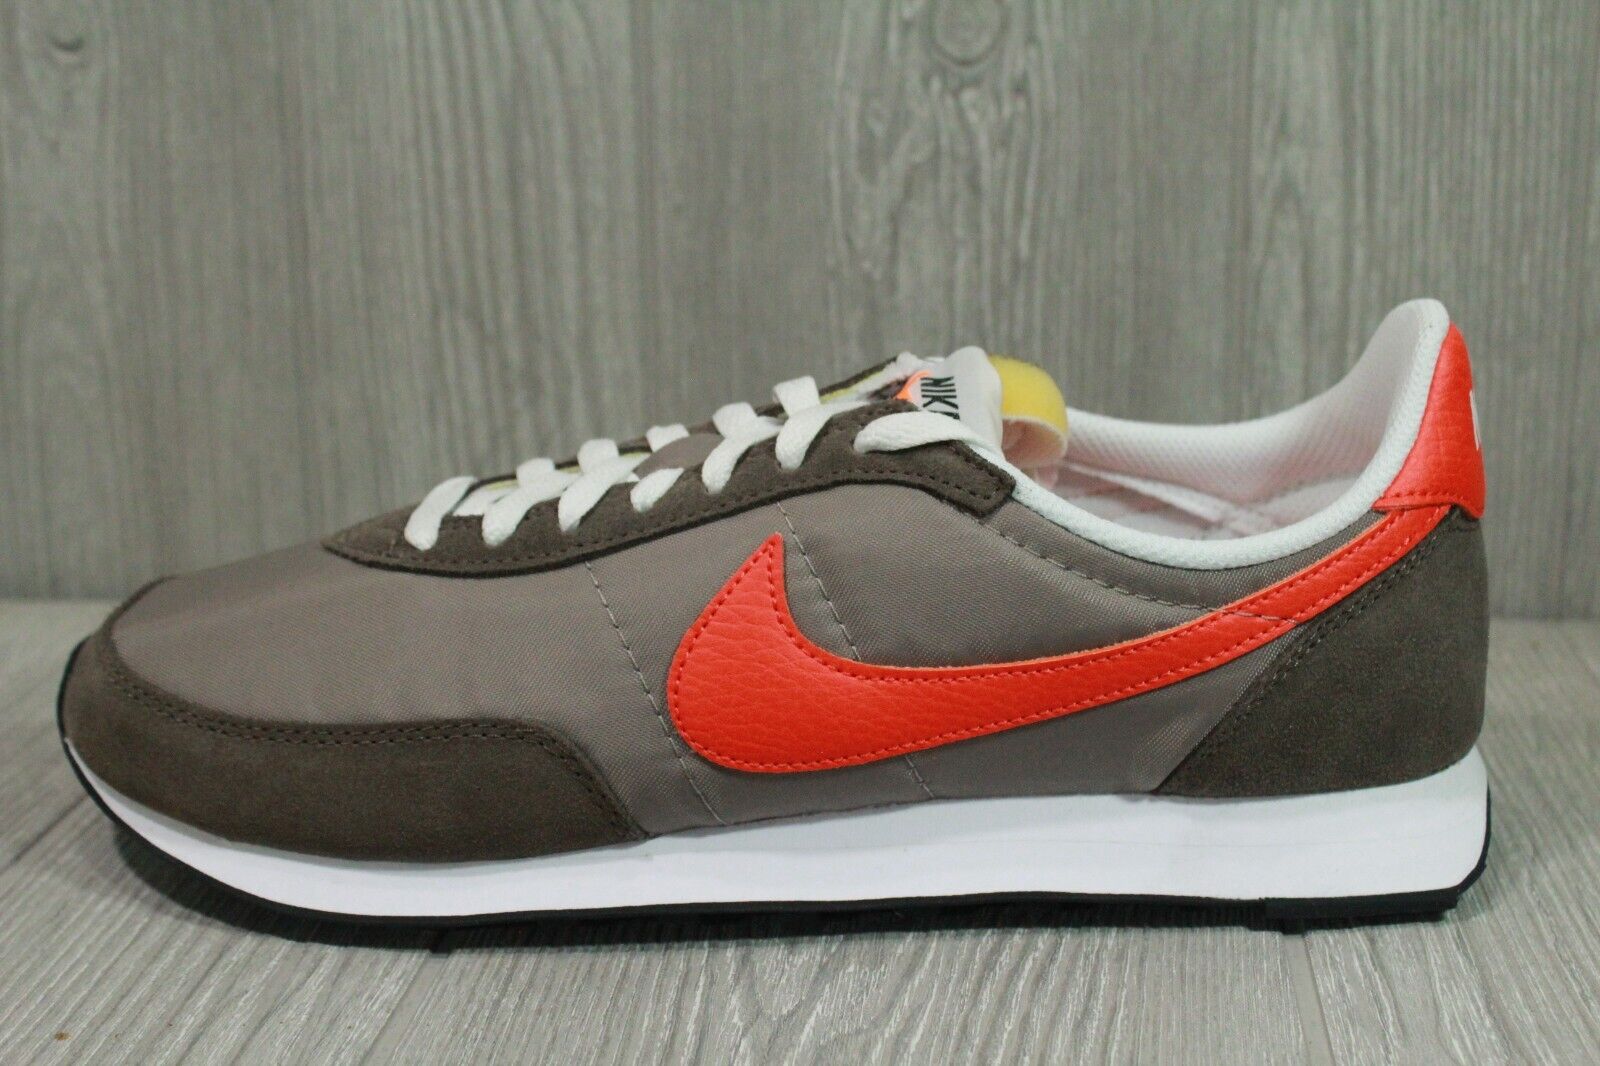 Nike Waffle Trainer 2 Moon Fossil Brown Orange Shoes DH1349 